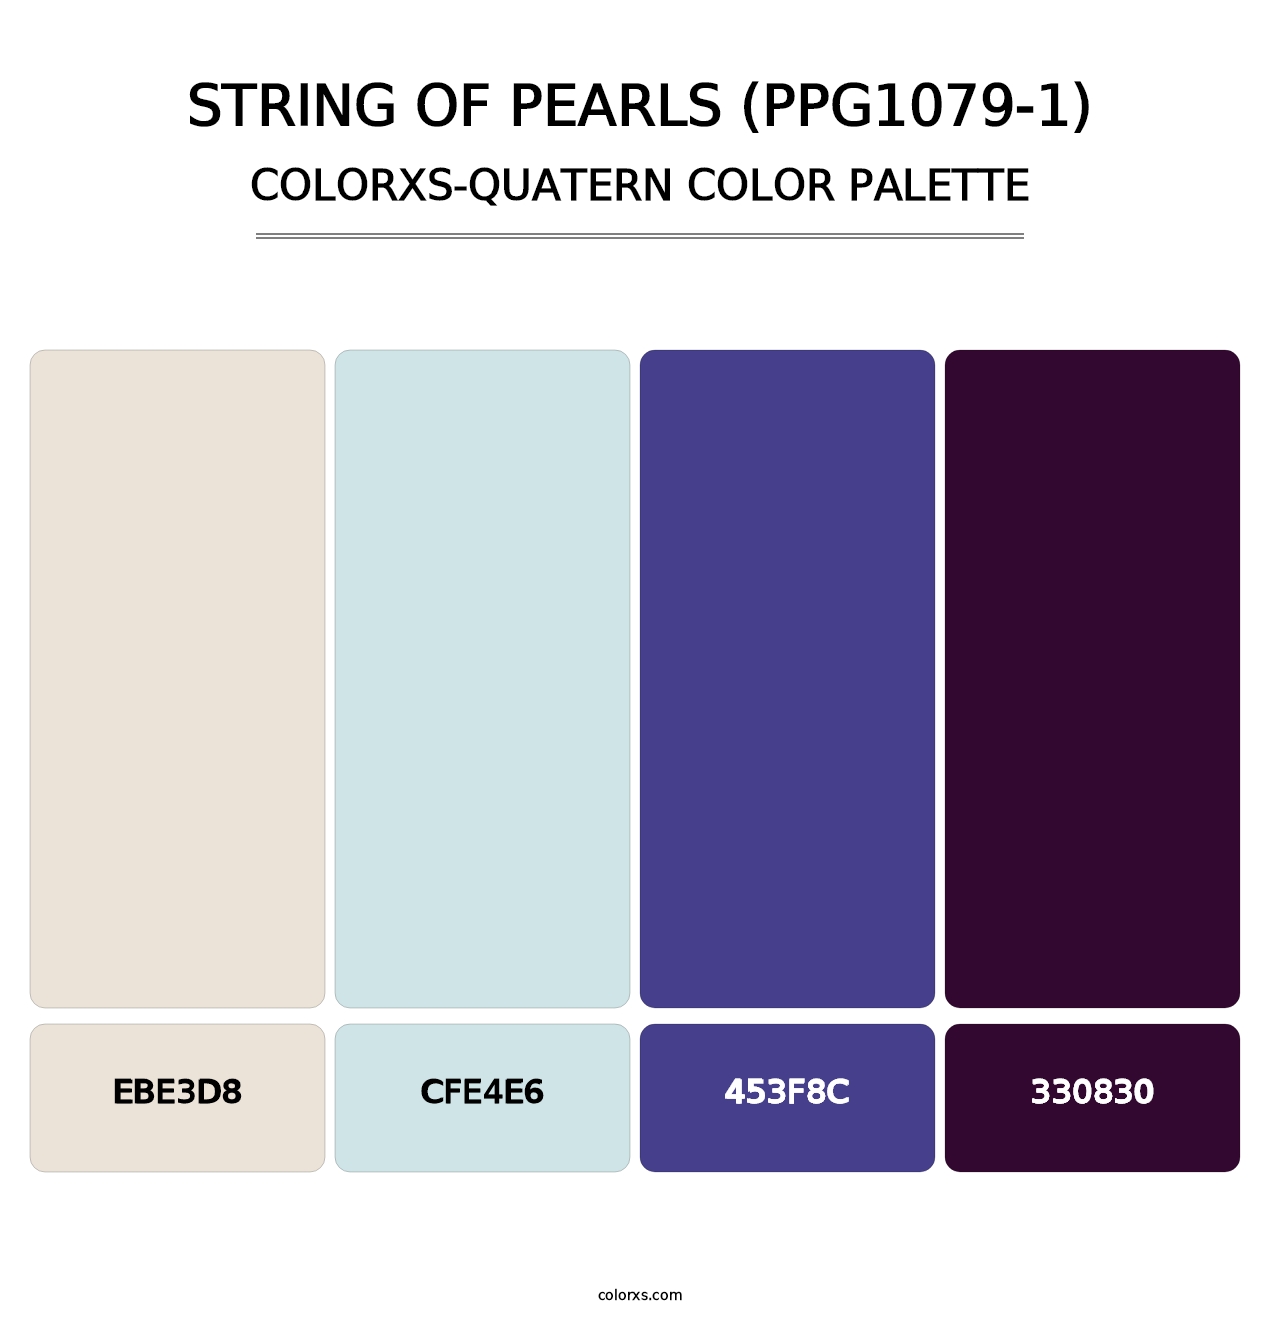 String Of Pearls (PPG1079-1) - Colorxs Quatern Palette